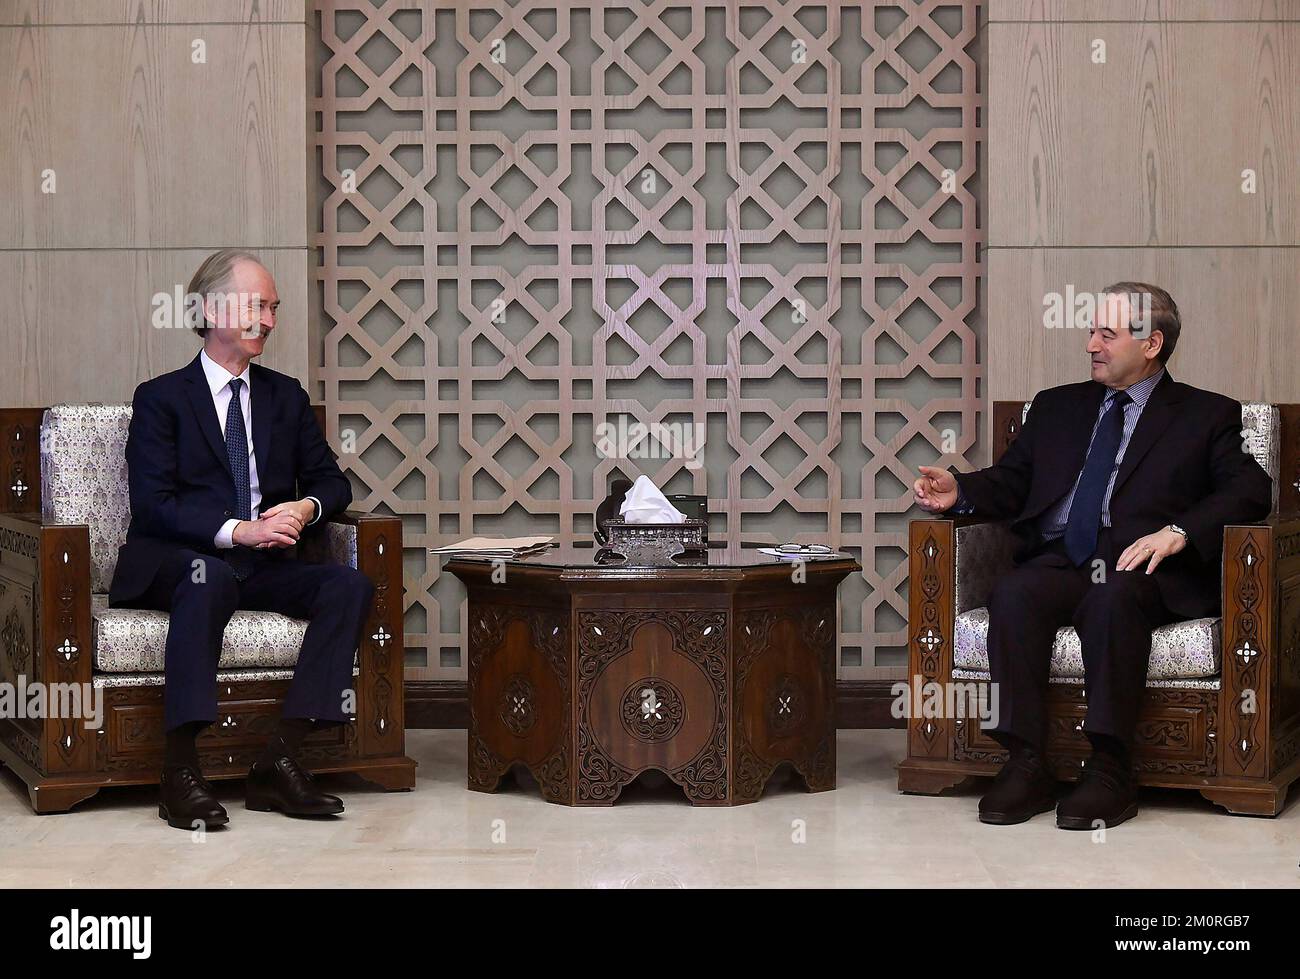 Damascus, Syria. 7th Dec, 2022. UN Special Envoy for Syria Geir Pedersen (L) speaks with Syrian Foreign Minister Faisal Mekdad in Damascus, Syria, Dec. 7, 2022. Pedersen said on Wednesday that the U.S.-led Western sanctions on Syria shouldn't block humanitarian assistance. Credit: Ammar Safarjalani/Xinhua/Alamy Live News Stock Photo